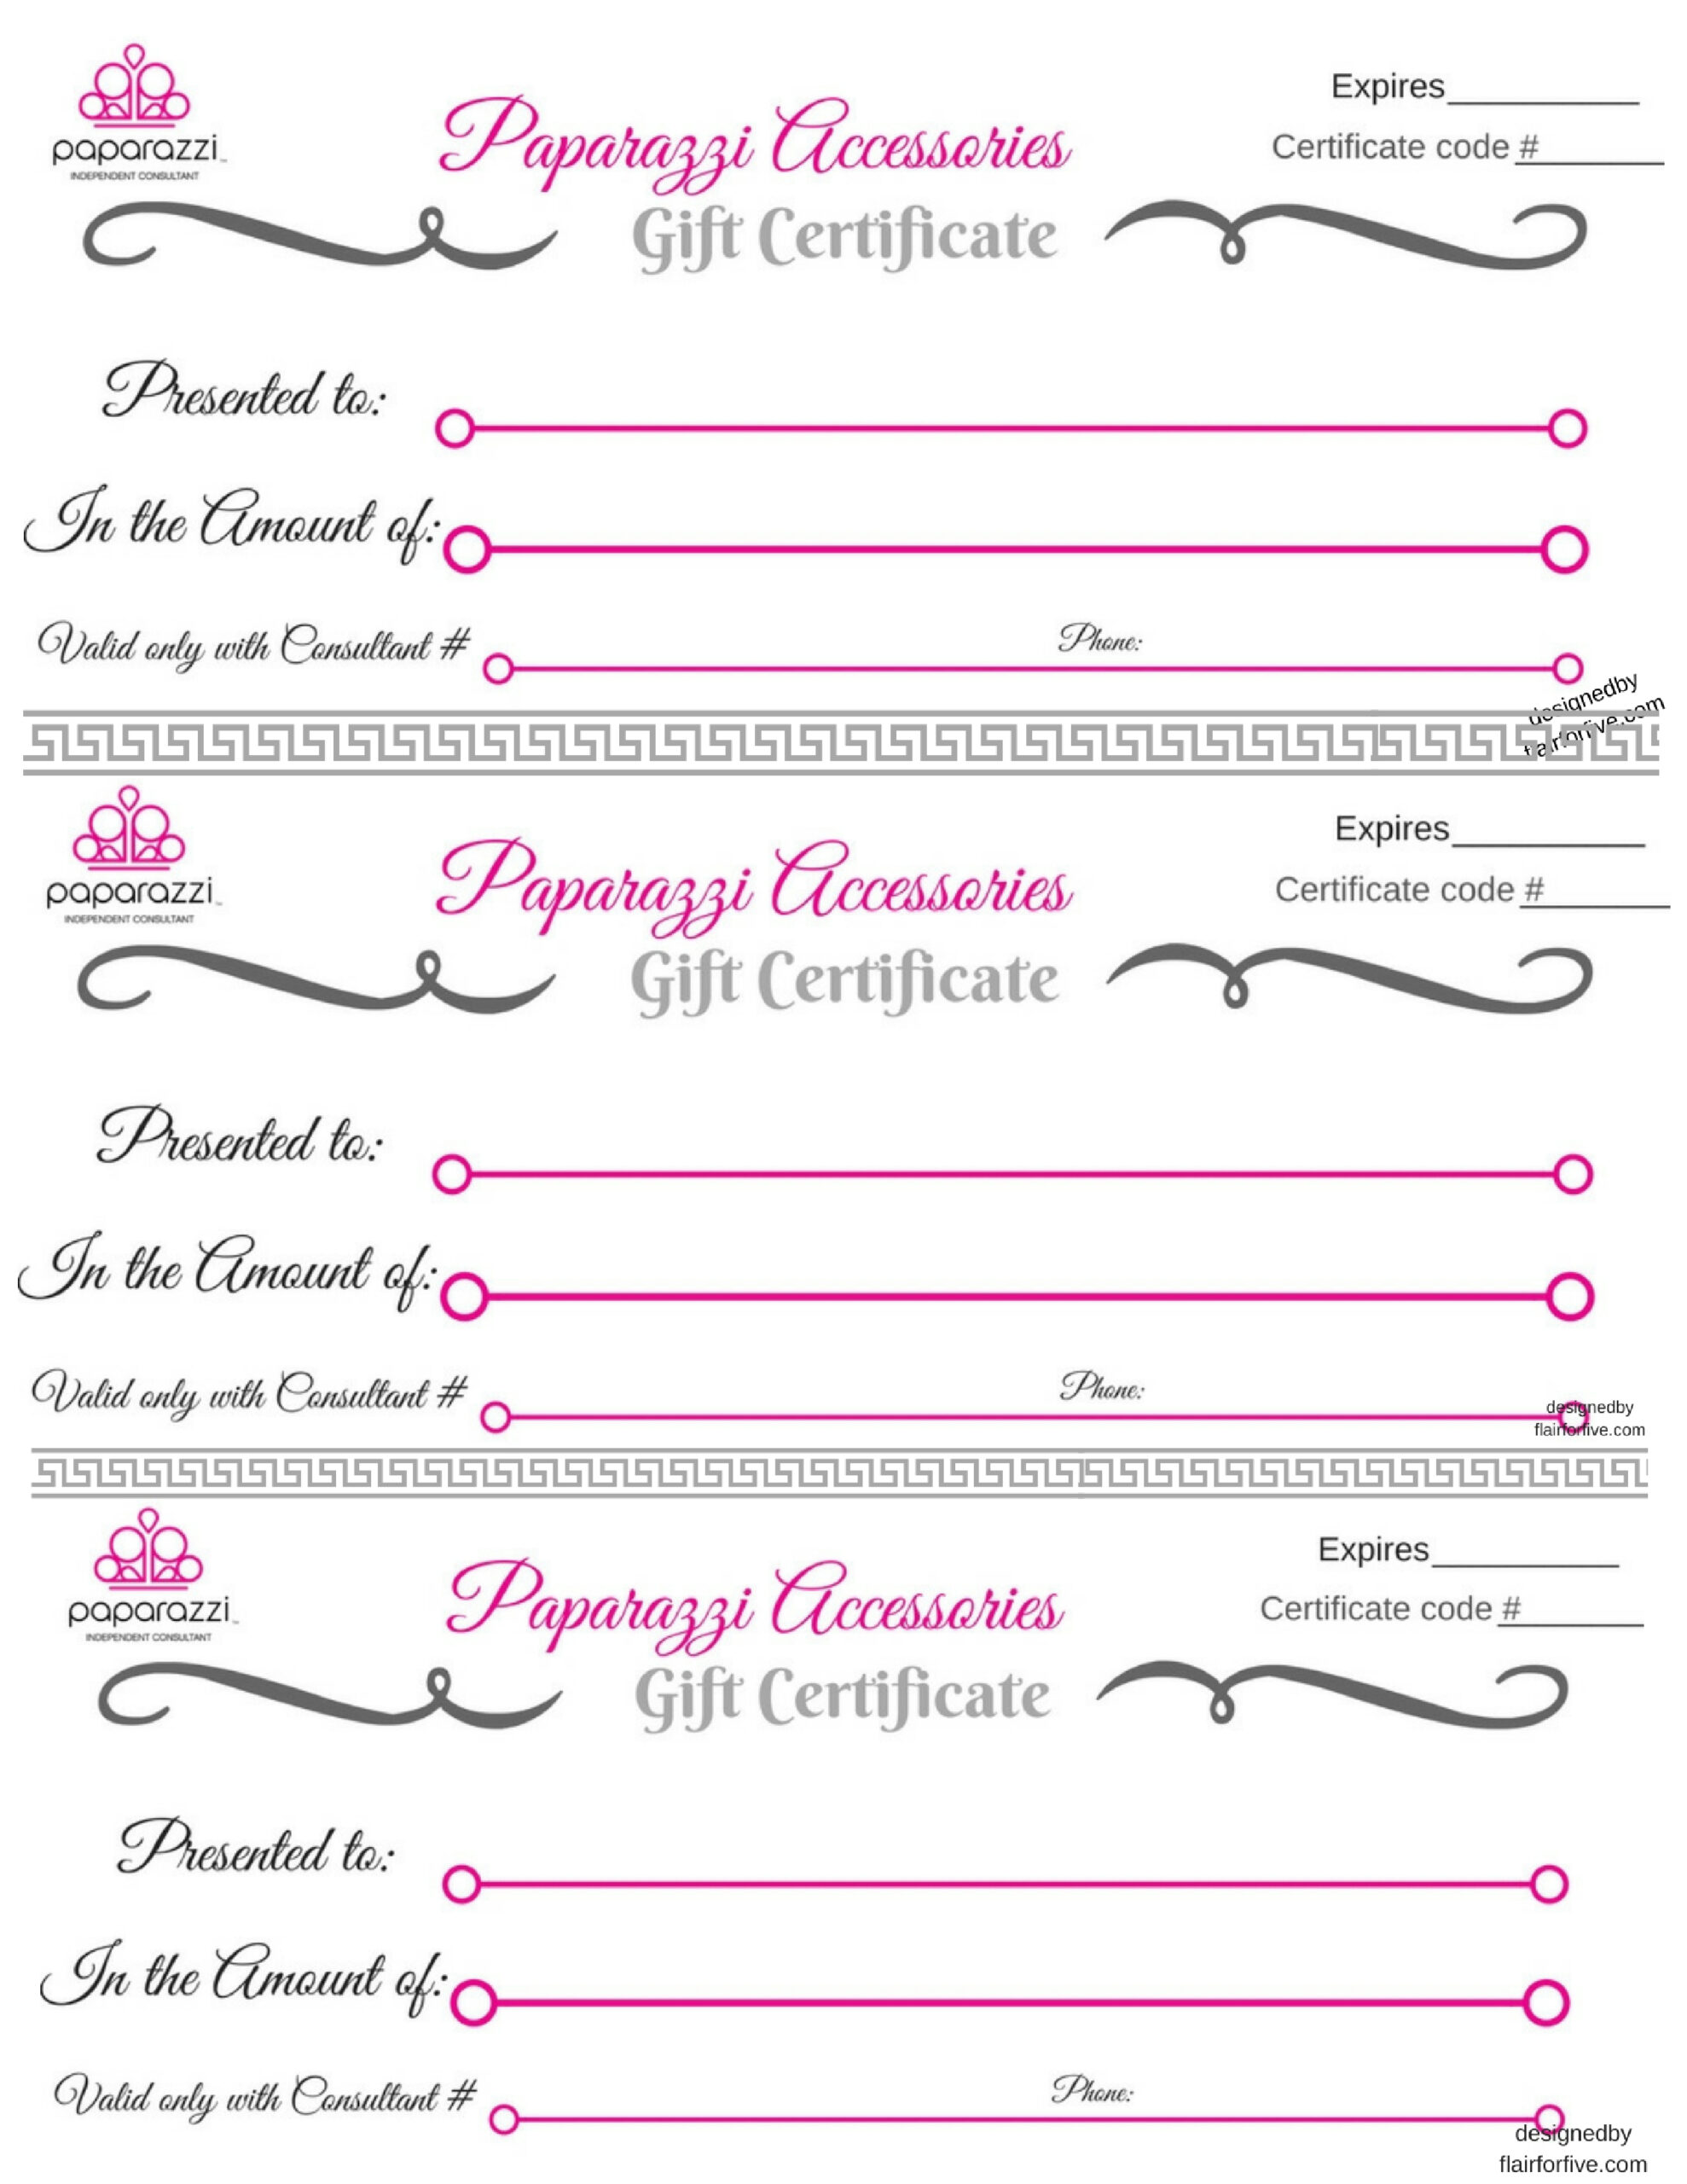 Paparazzi Gift Certificate Paparazzi 5 Jewelry Join Or Shop Online